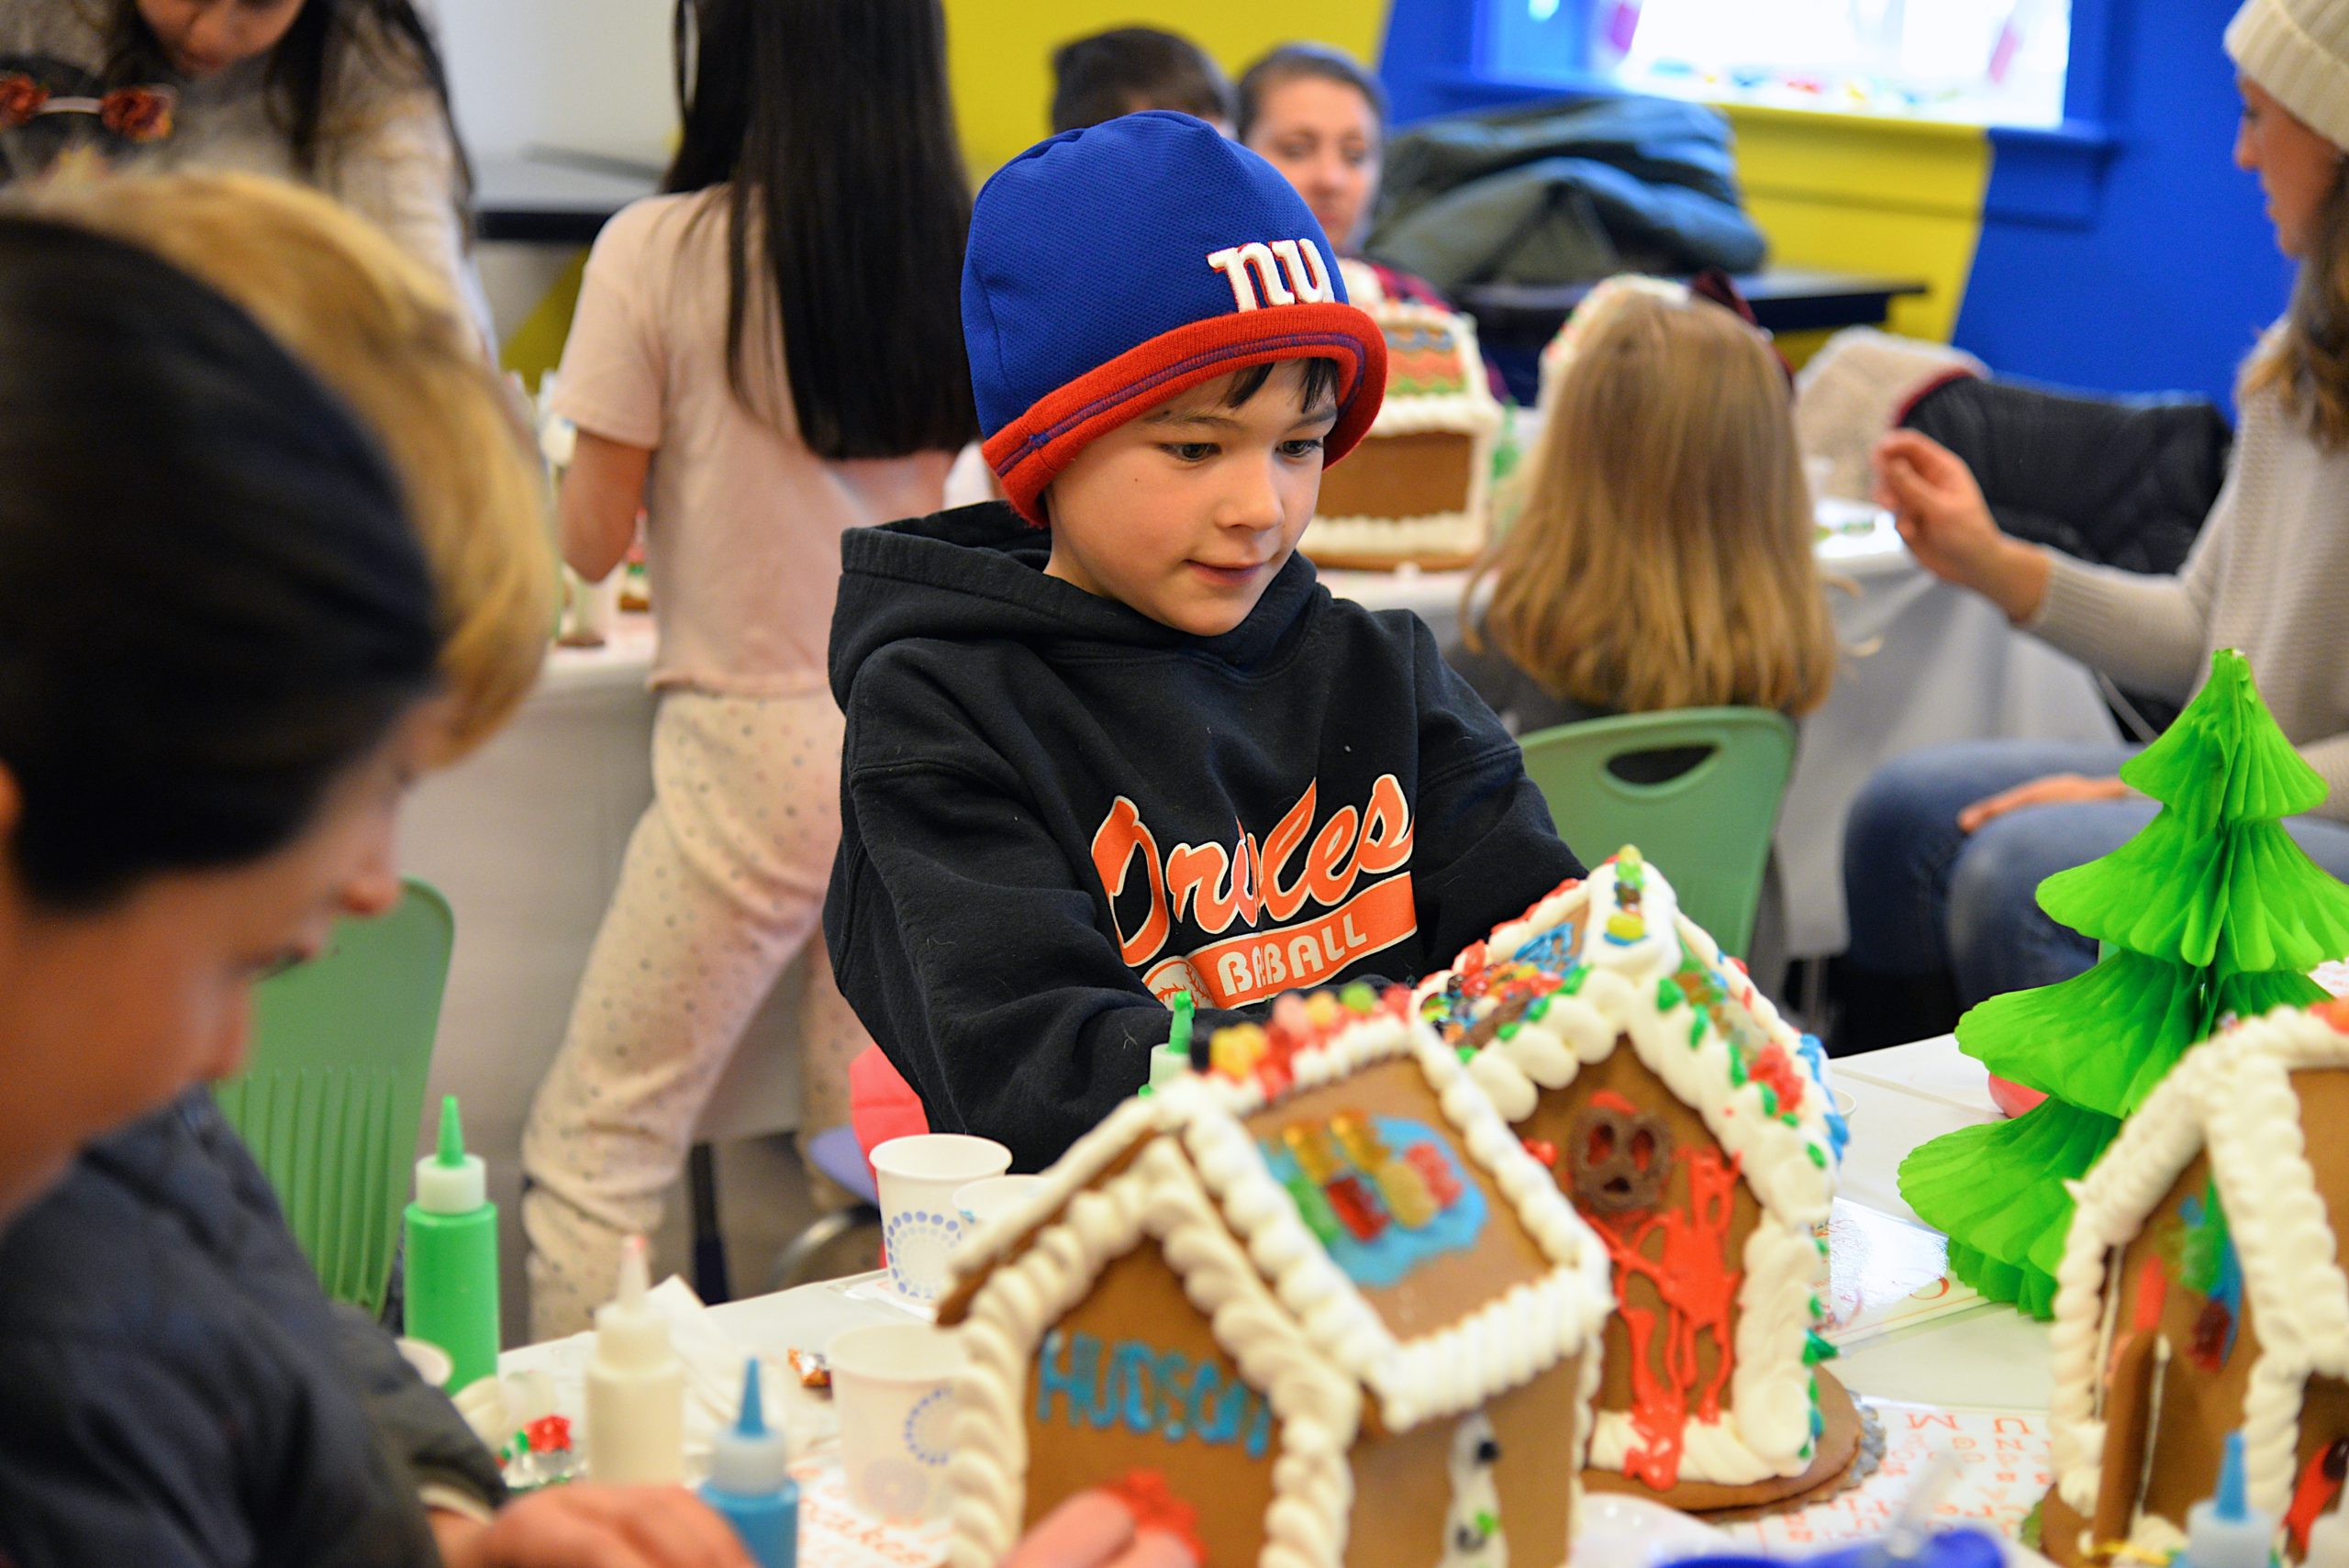 Guild Hall offered an opportunity to get in the holiday spirit by making gingerbread houses on Saturday. Harry Thomas working on his creation. KYRIL BROMLEY 